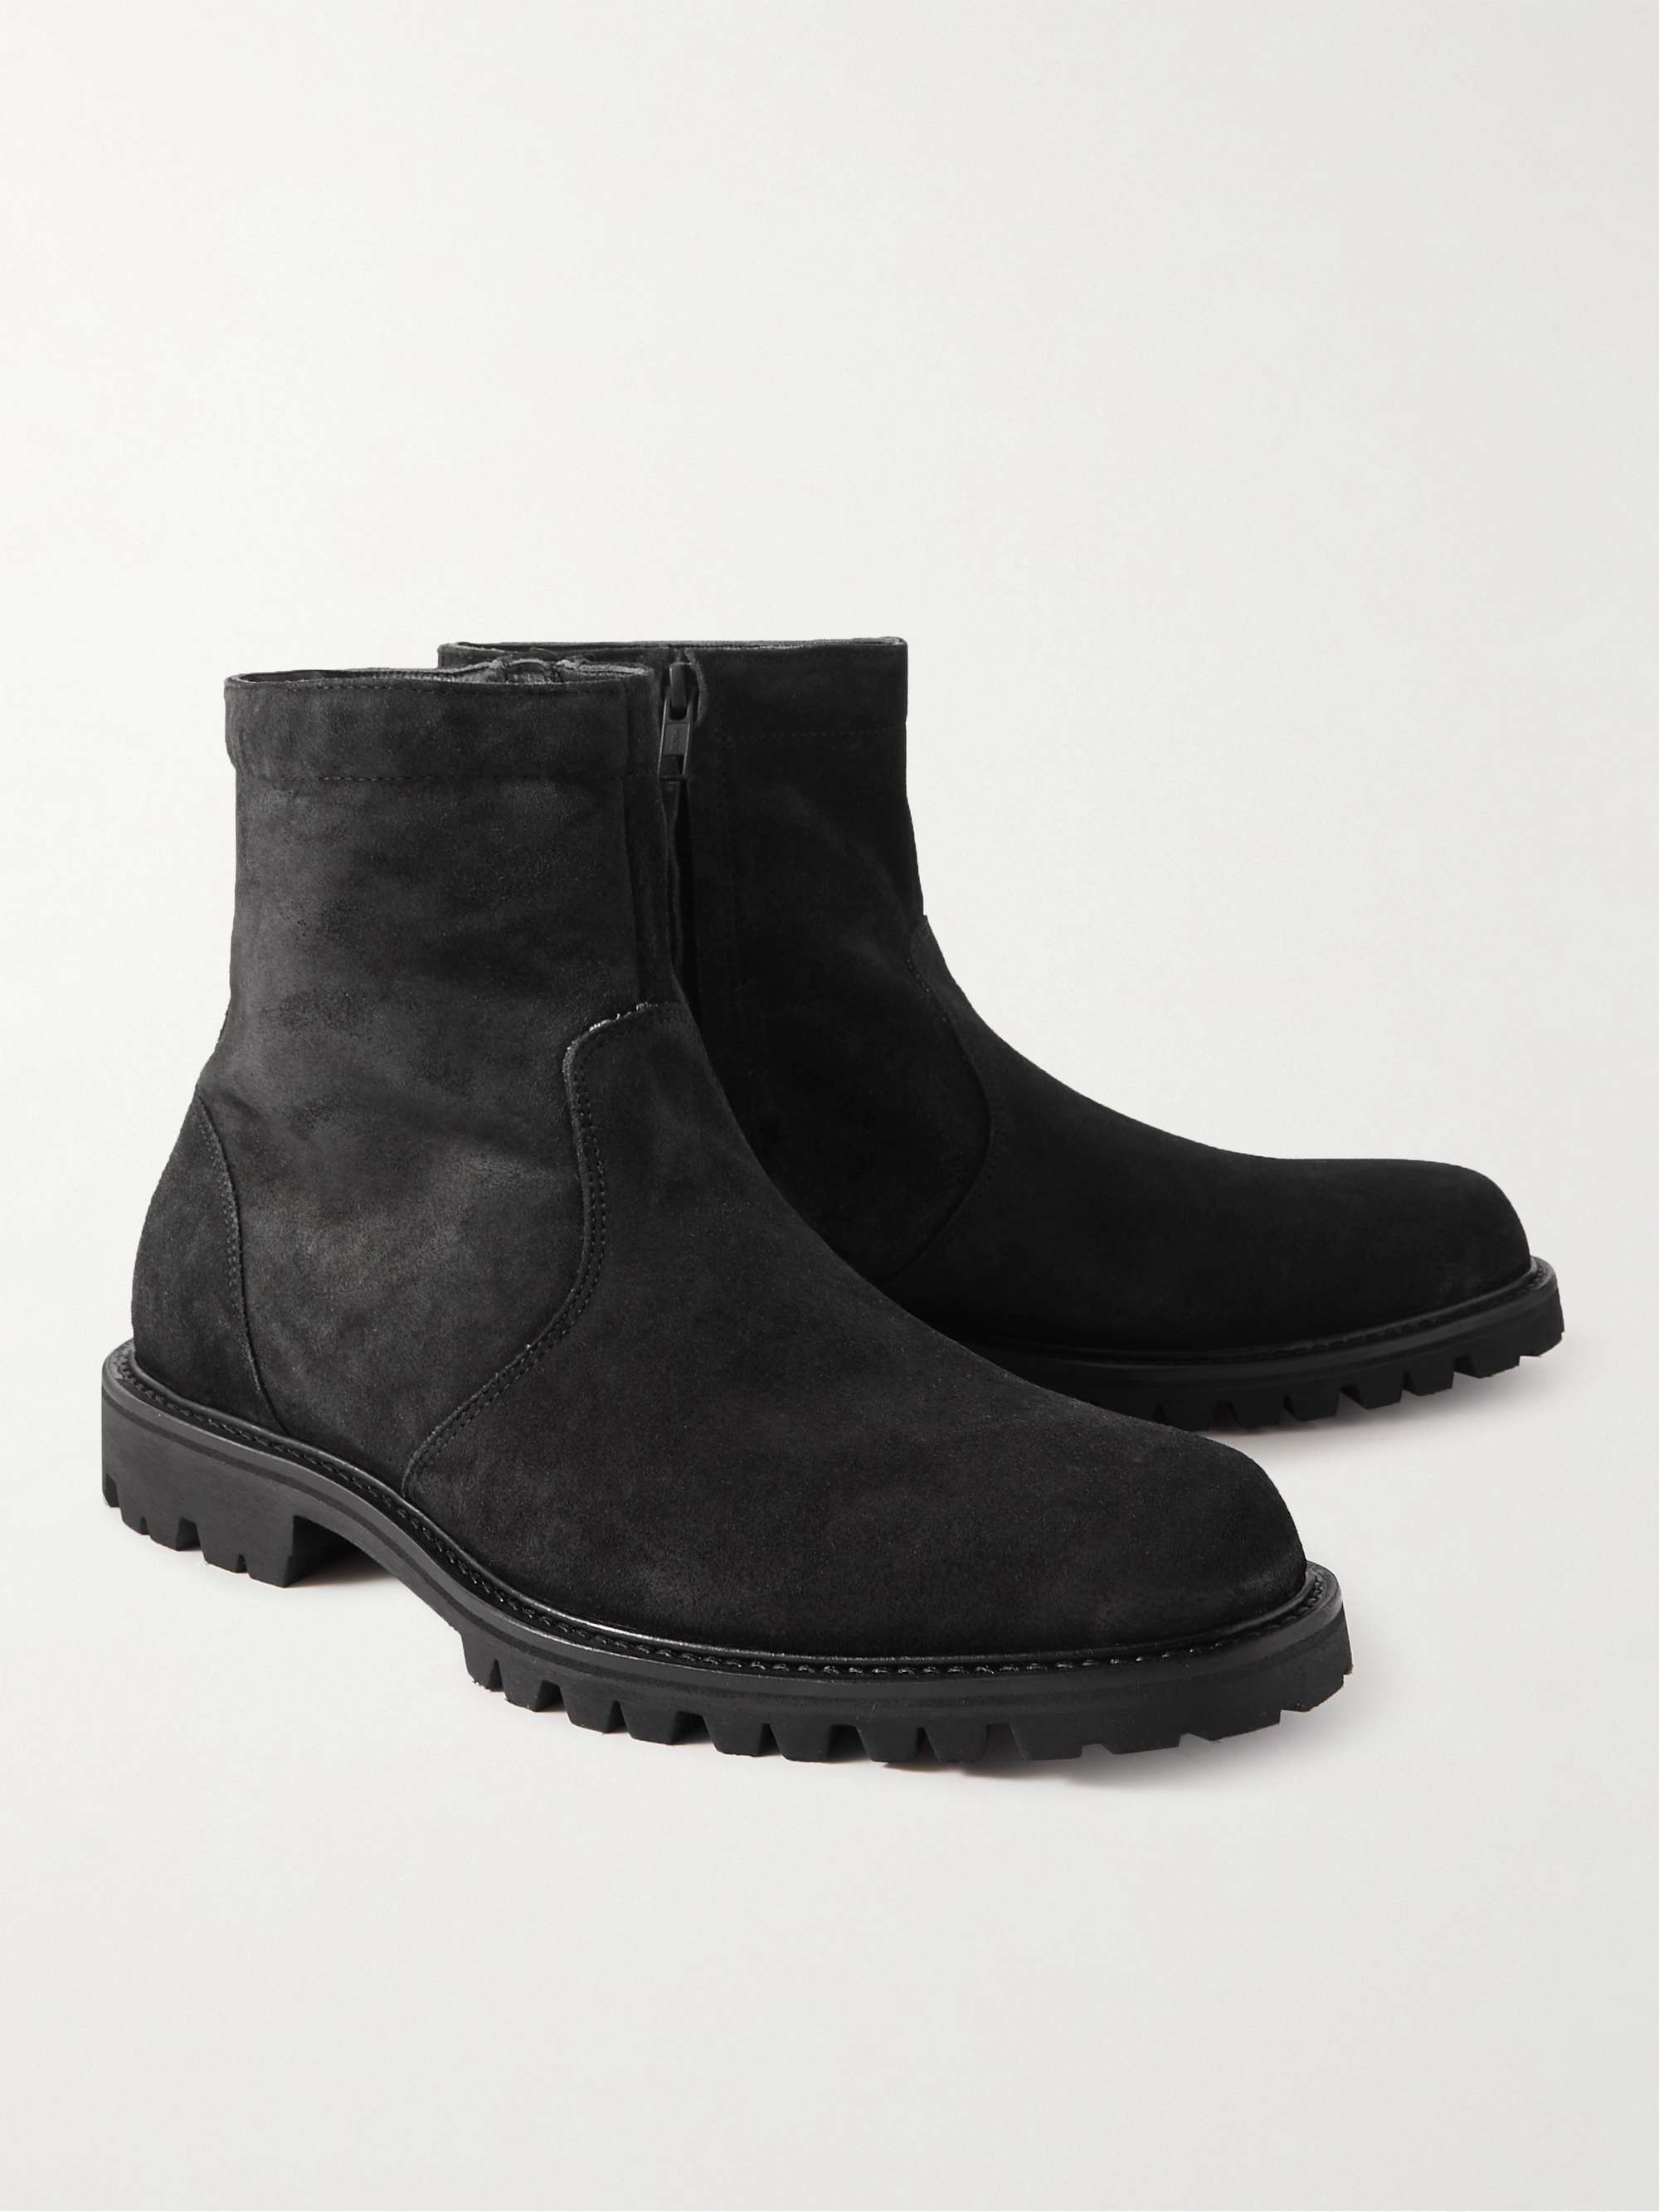 MR P. Olie Shearling-Lined Suede Boots